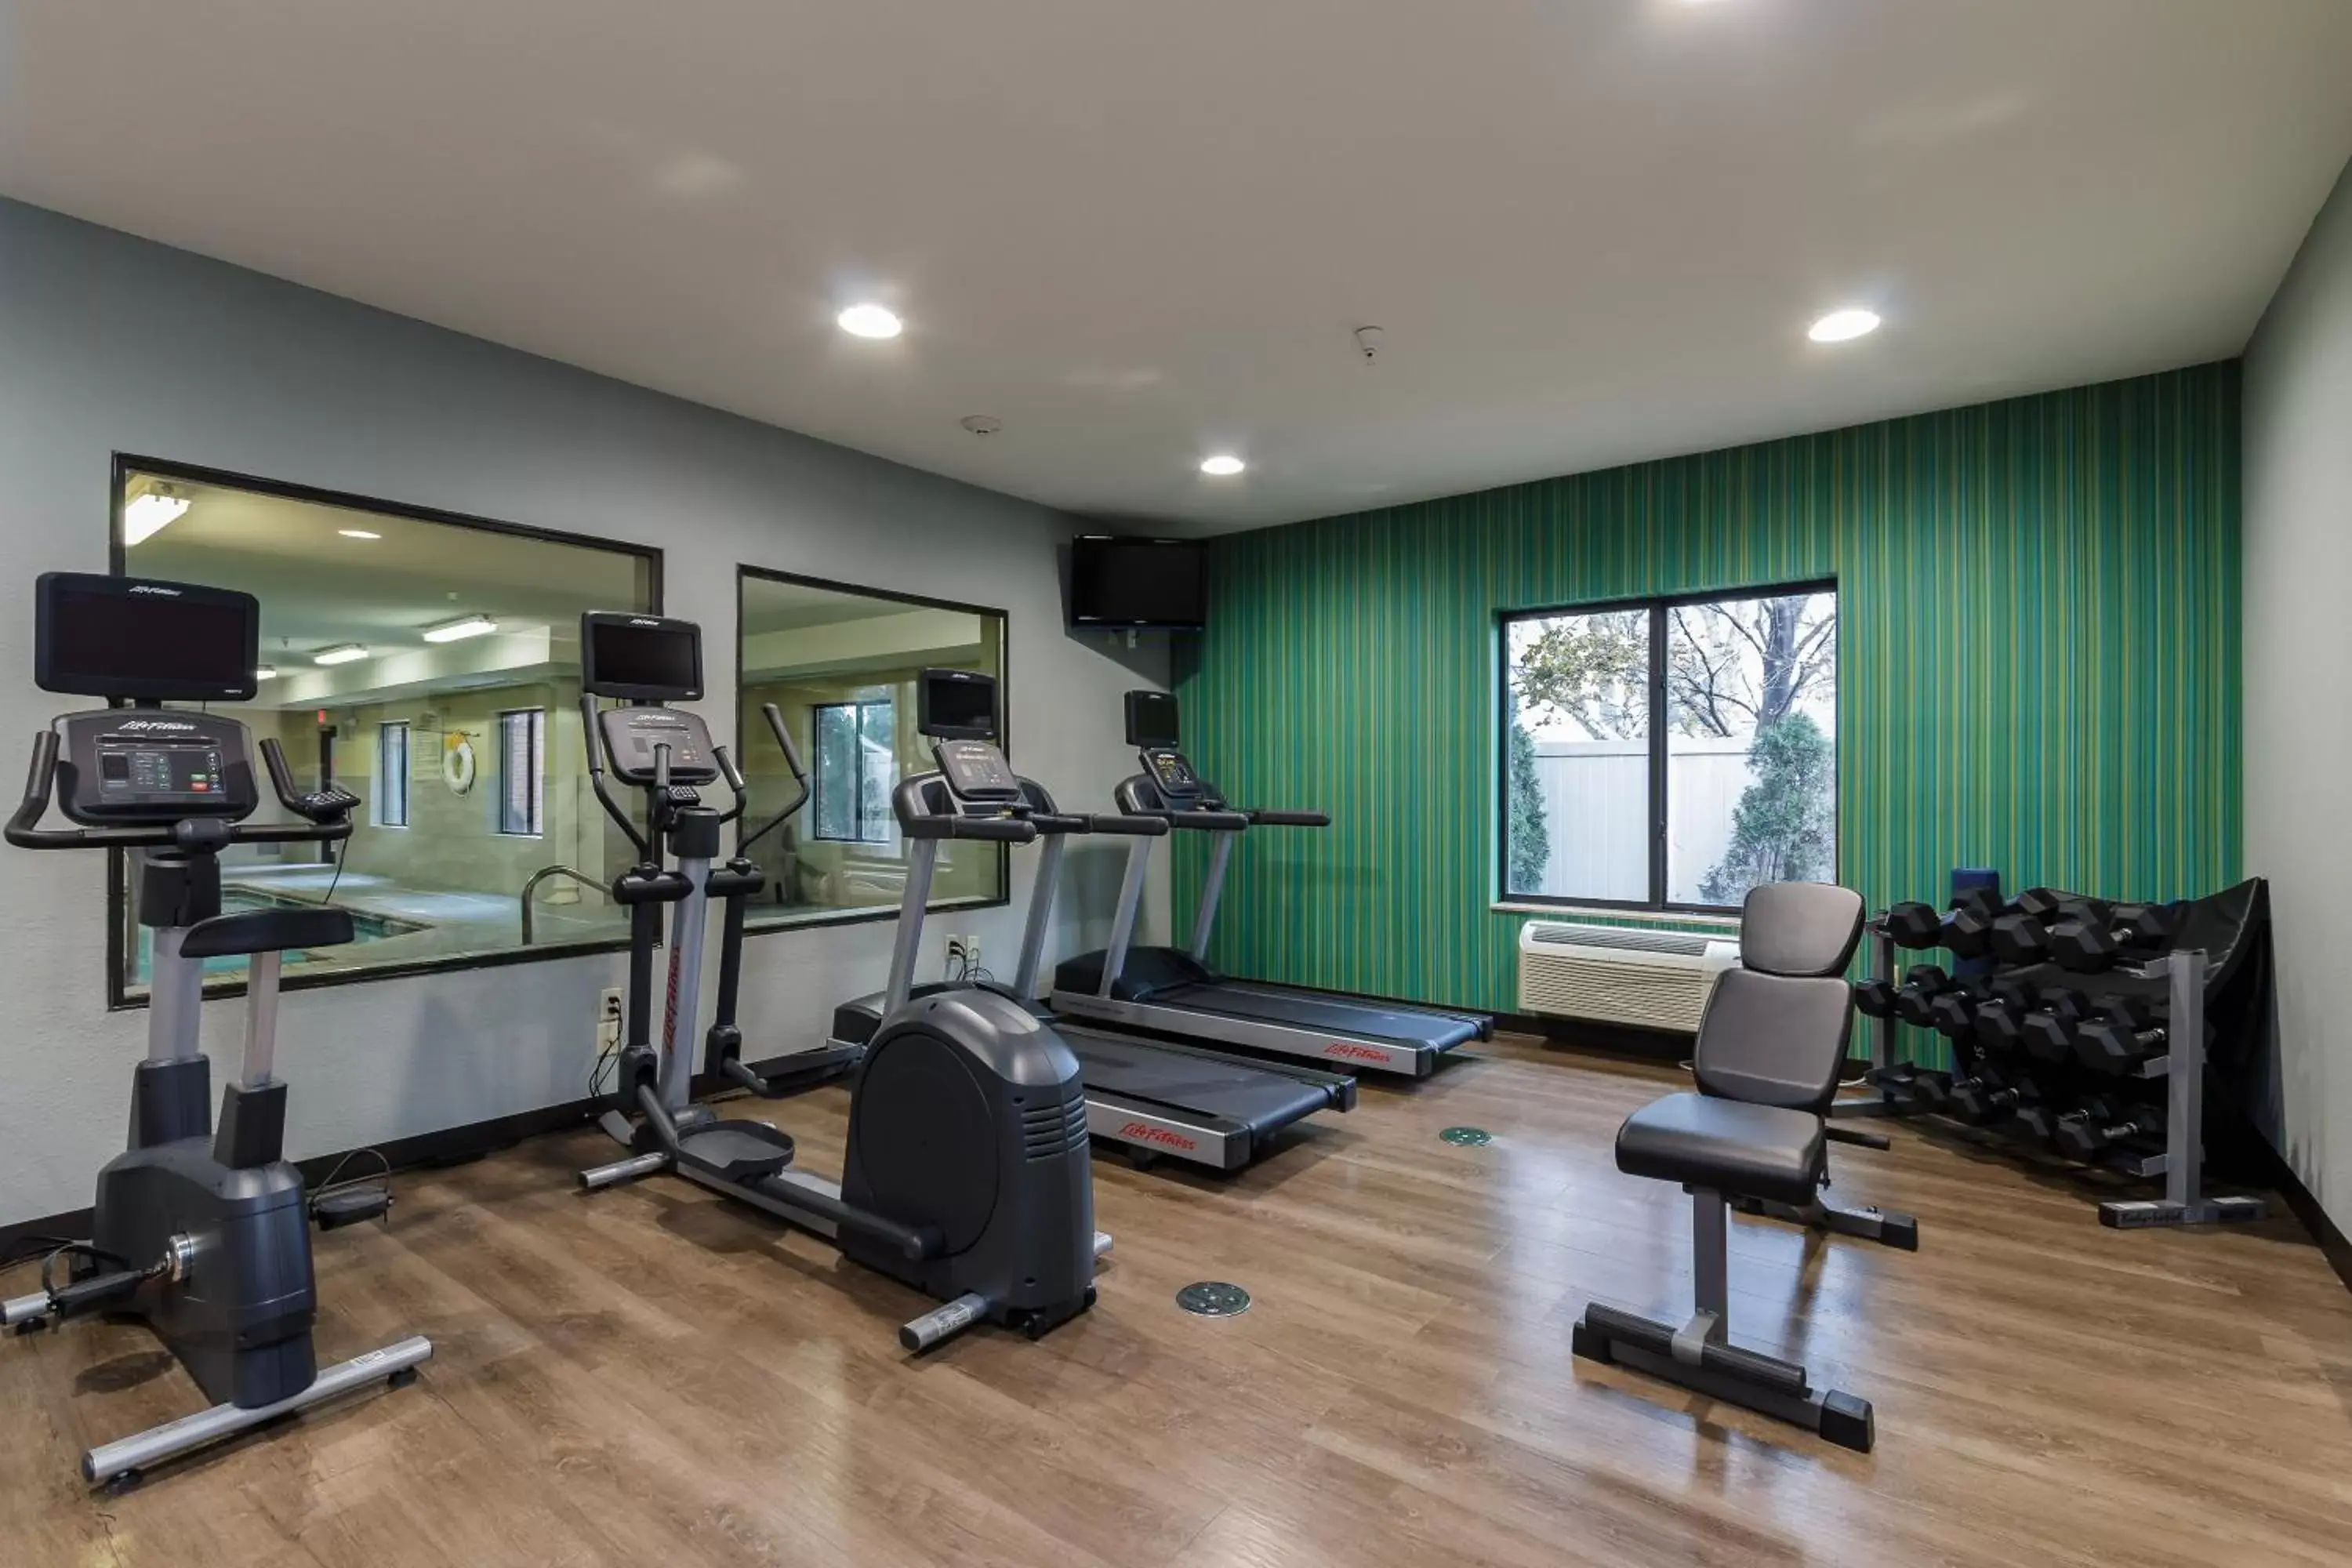 Fitness centre/facilities, View in Holiday Inn Express & Suites - South Bend - Notre Dame Univ.